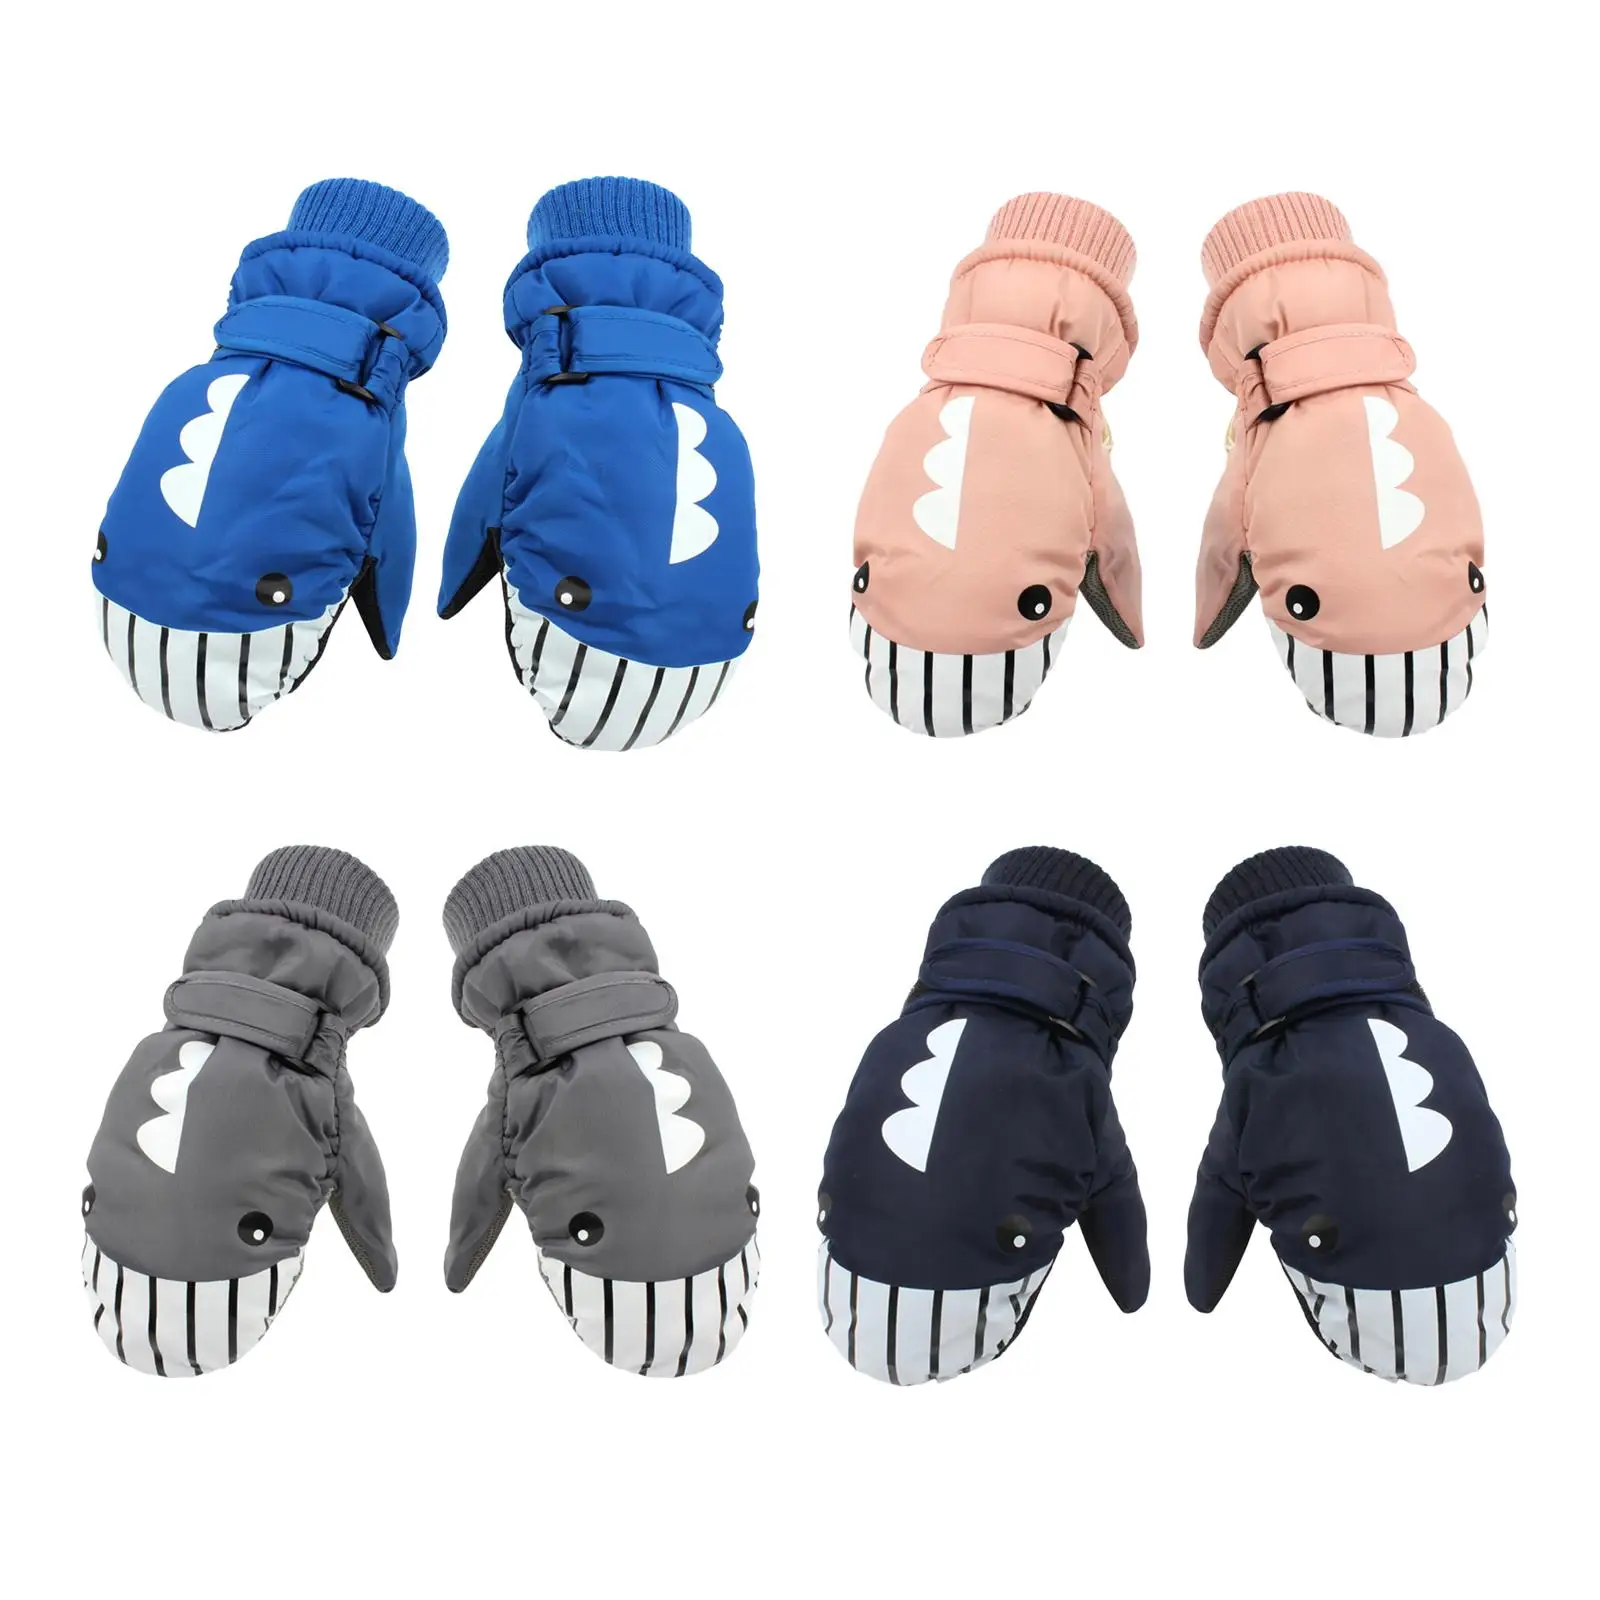 

Kids Winter Gloves Lightweight Comfortable Waterproof Thickened Gloves Warm Mittens for Outdoor Biking Snow Cold Weather Riding